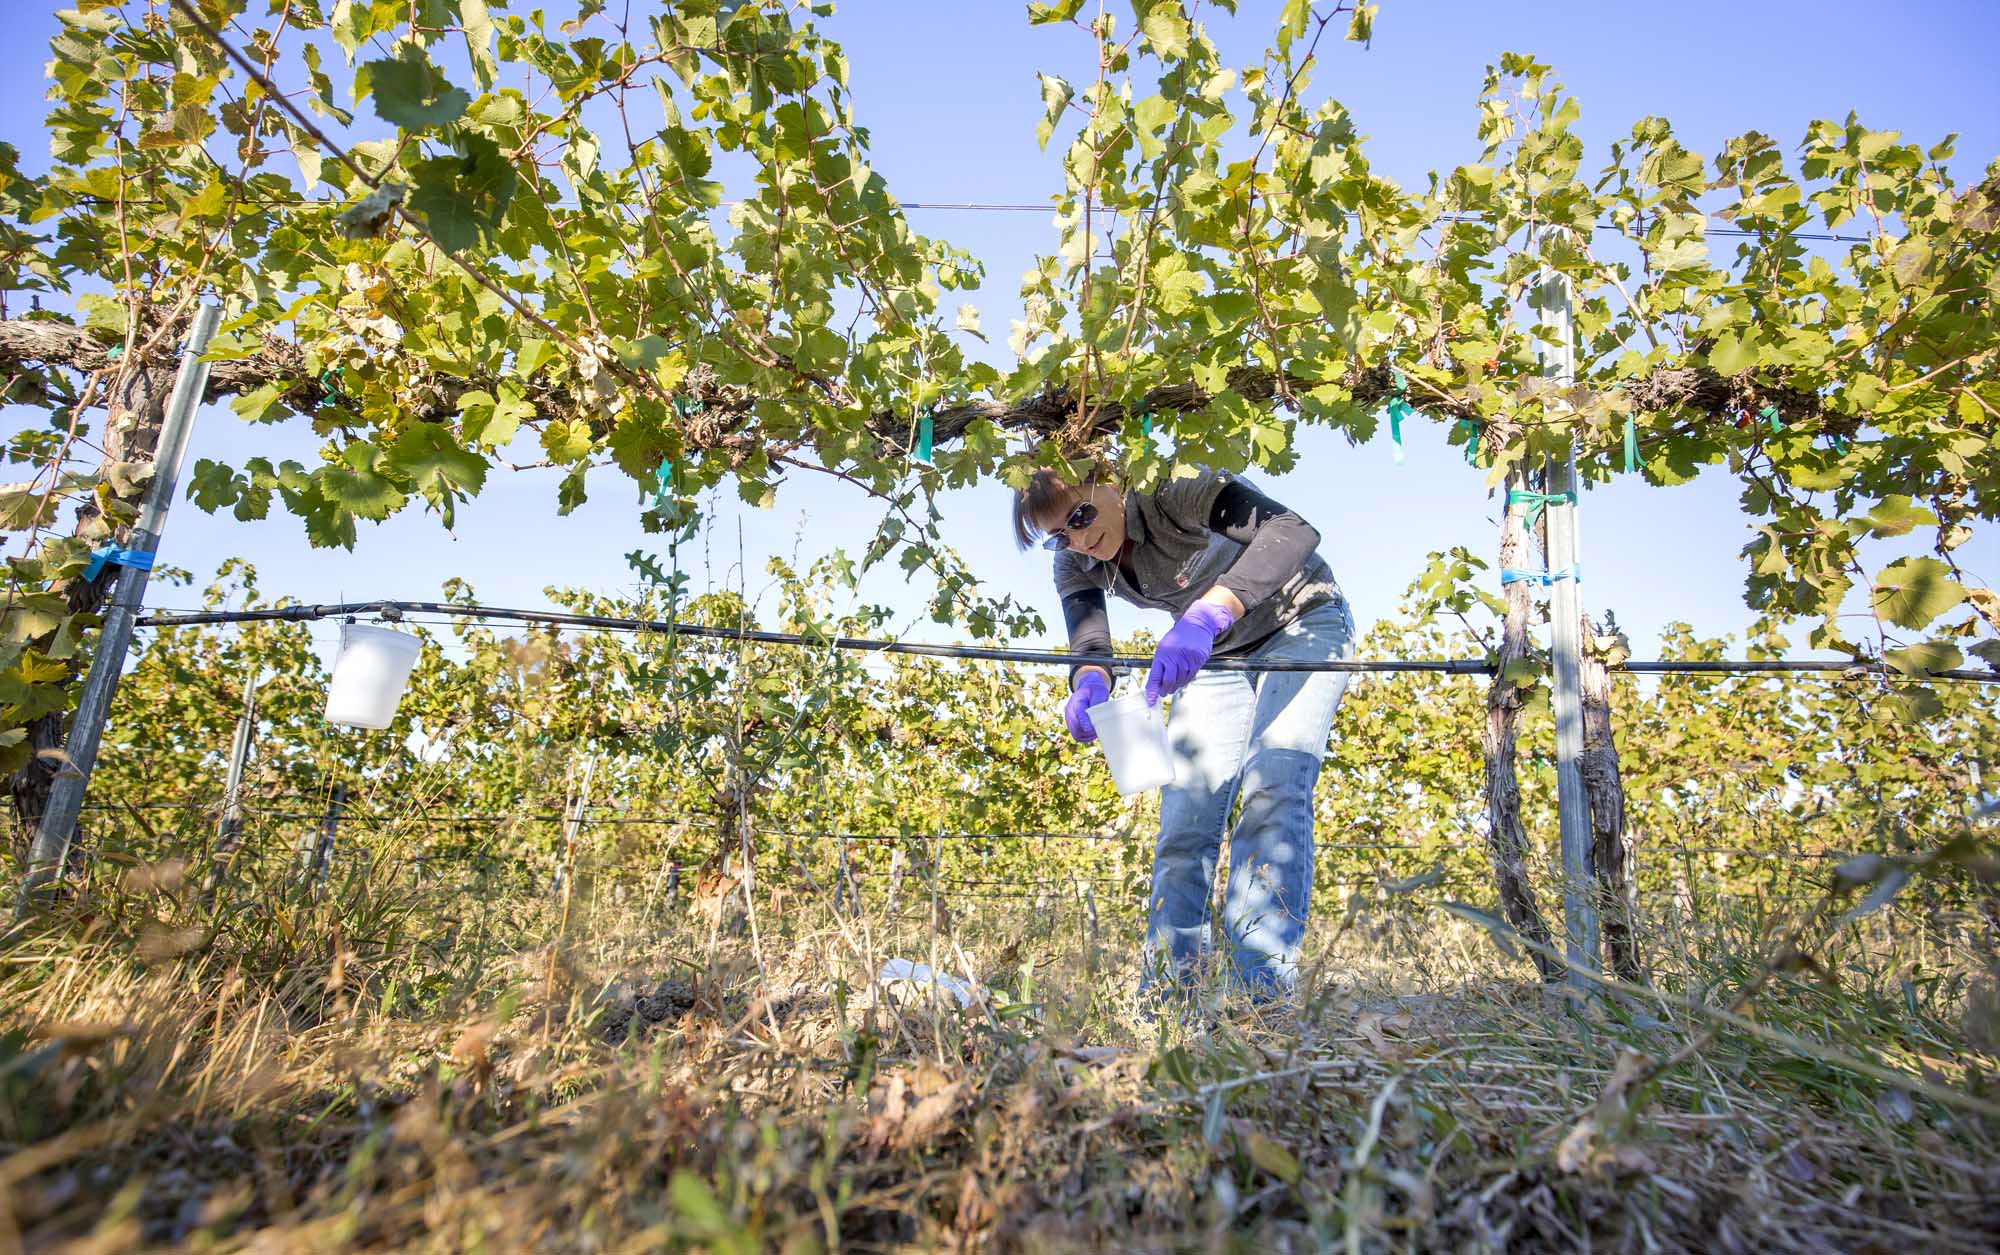 Michelle Moyer attaches containers to irrigation emitters in a Mattawa, Washington, vineyard that helps disperse nematicides. The work is part of a multiyear nematicide study by Moyer and Katherine East from Washington State University. (TJ Mullinax/Good Fruit Grower)